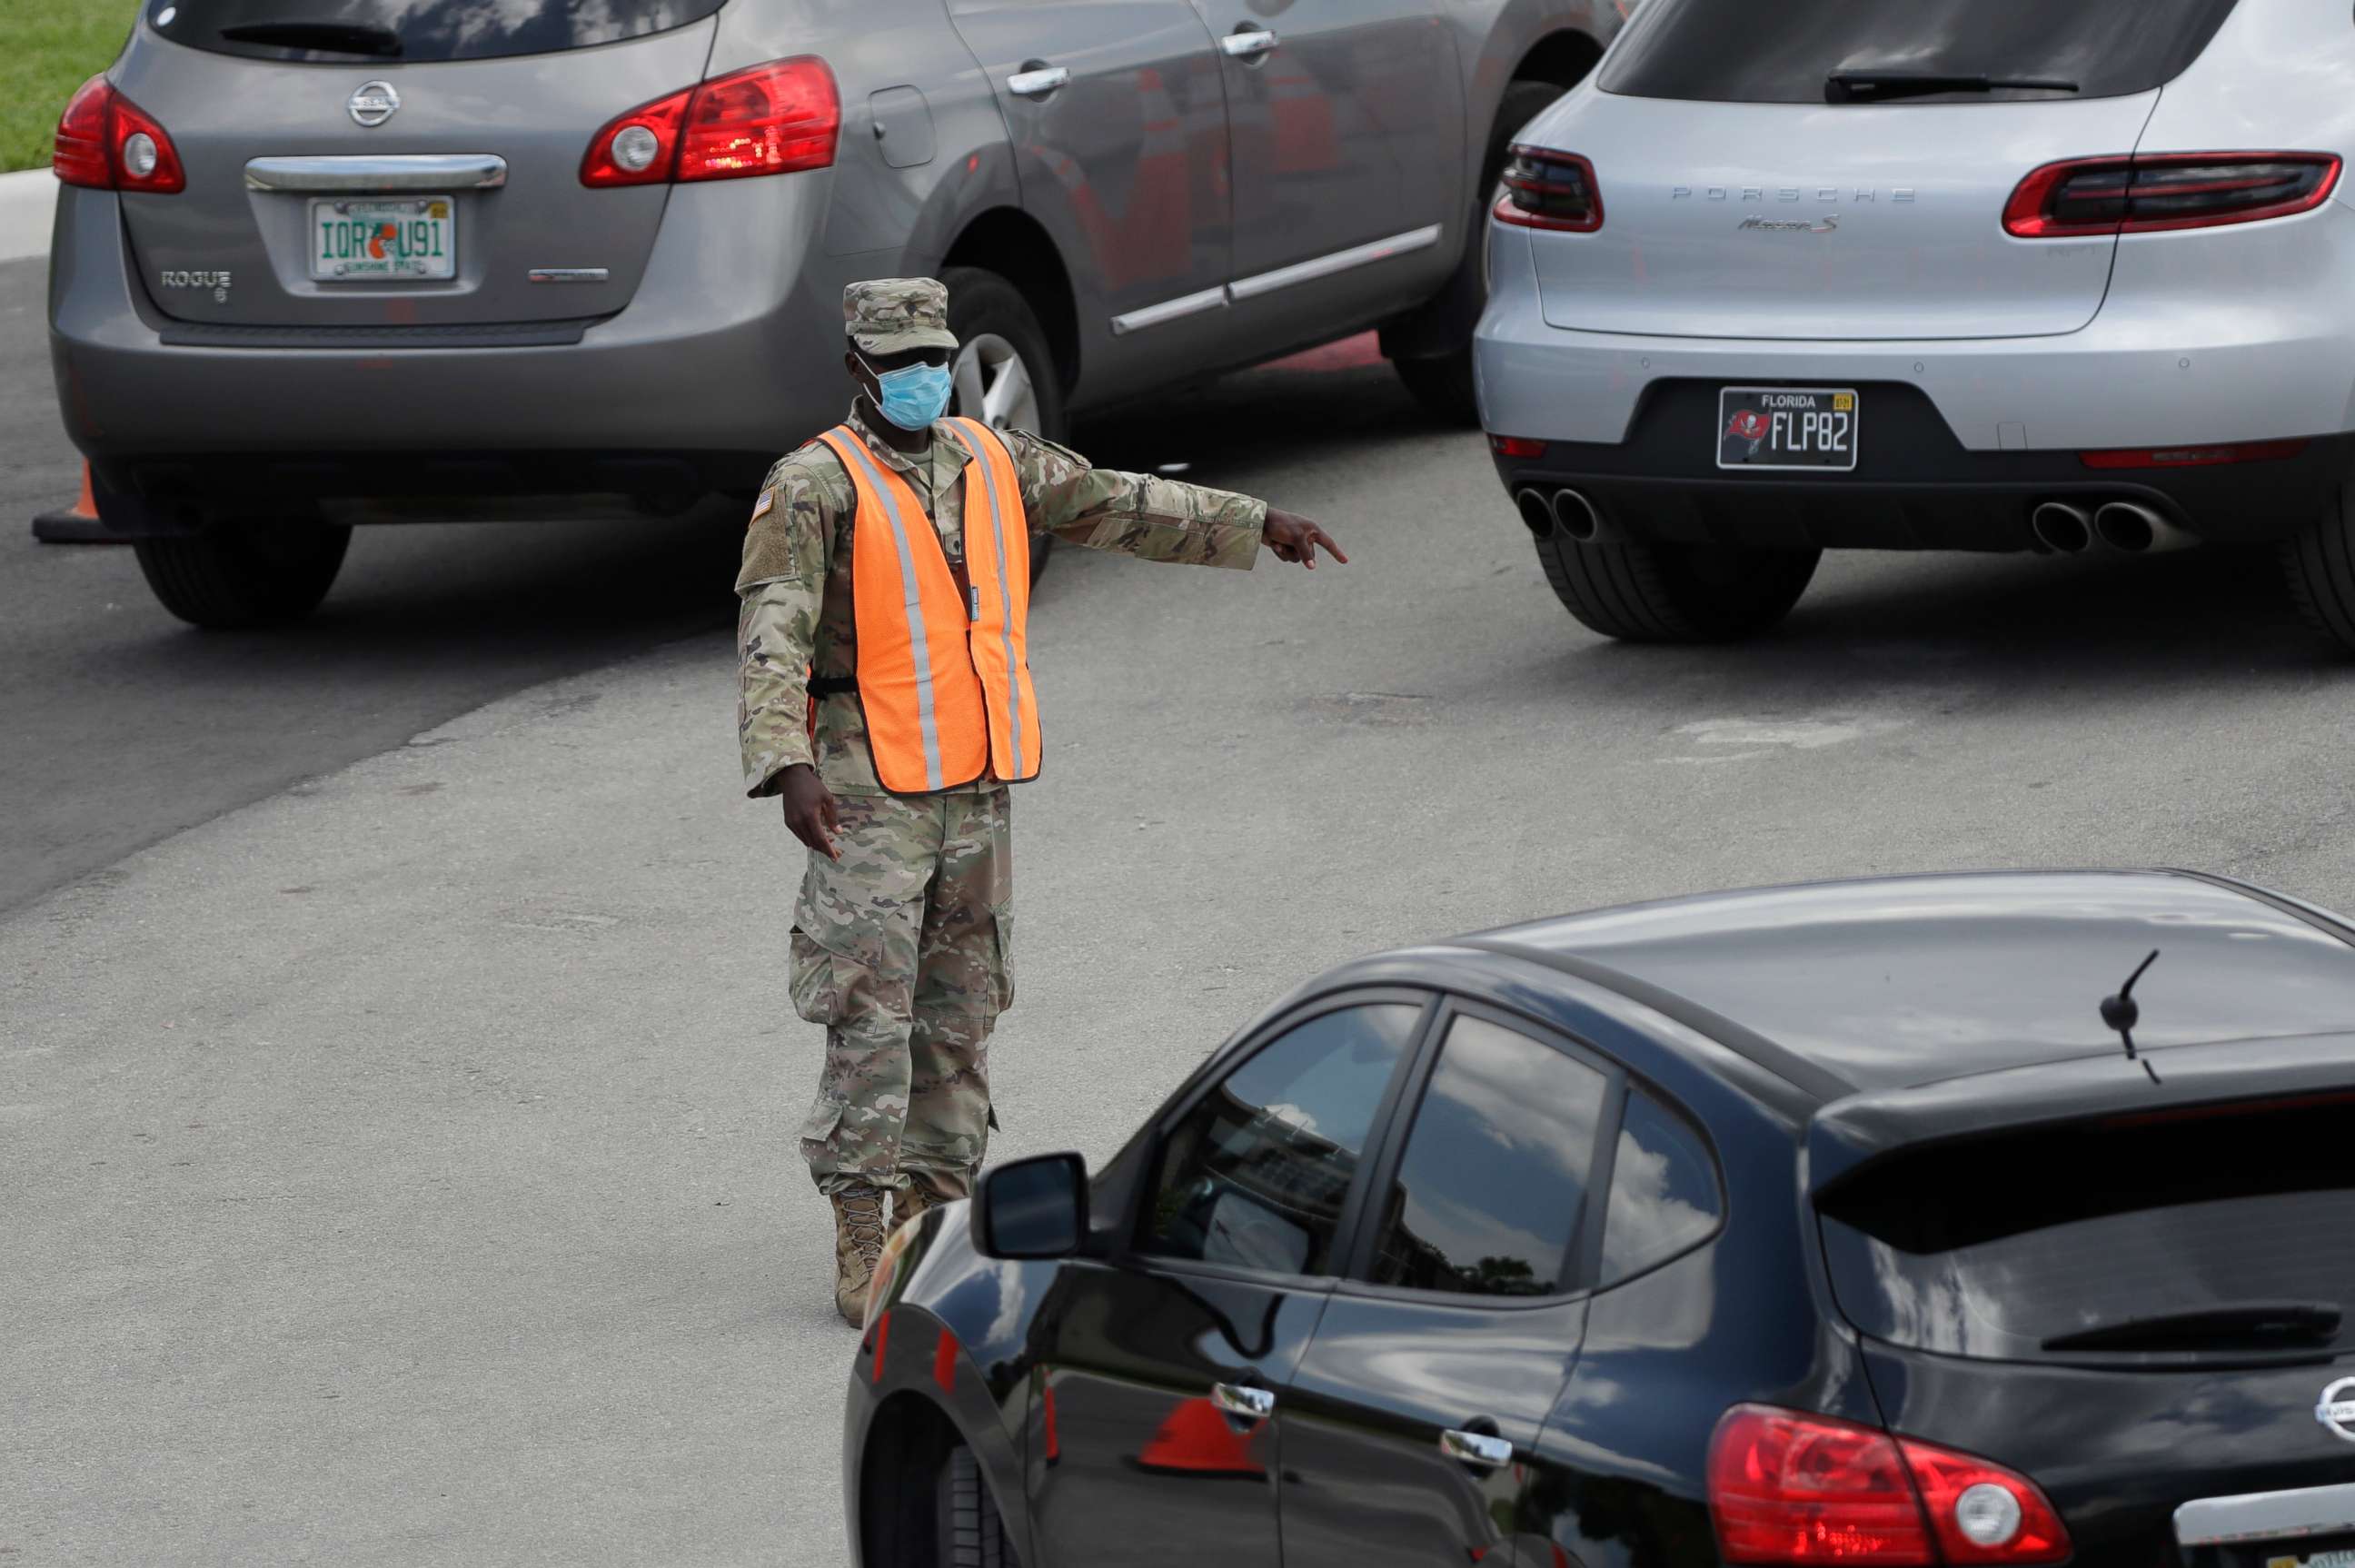 PHOTO: A National Guardsman directs traffic at a drive-thru COVID-19 testing site outside Hard Rock Stadium in Miami Gardens, Florida, on July 8, 2020. Florida has become one of the nation's hot spots for the novel coronavirus.